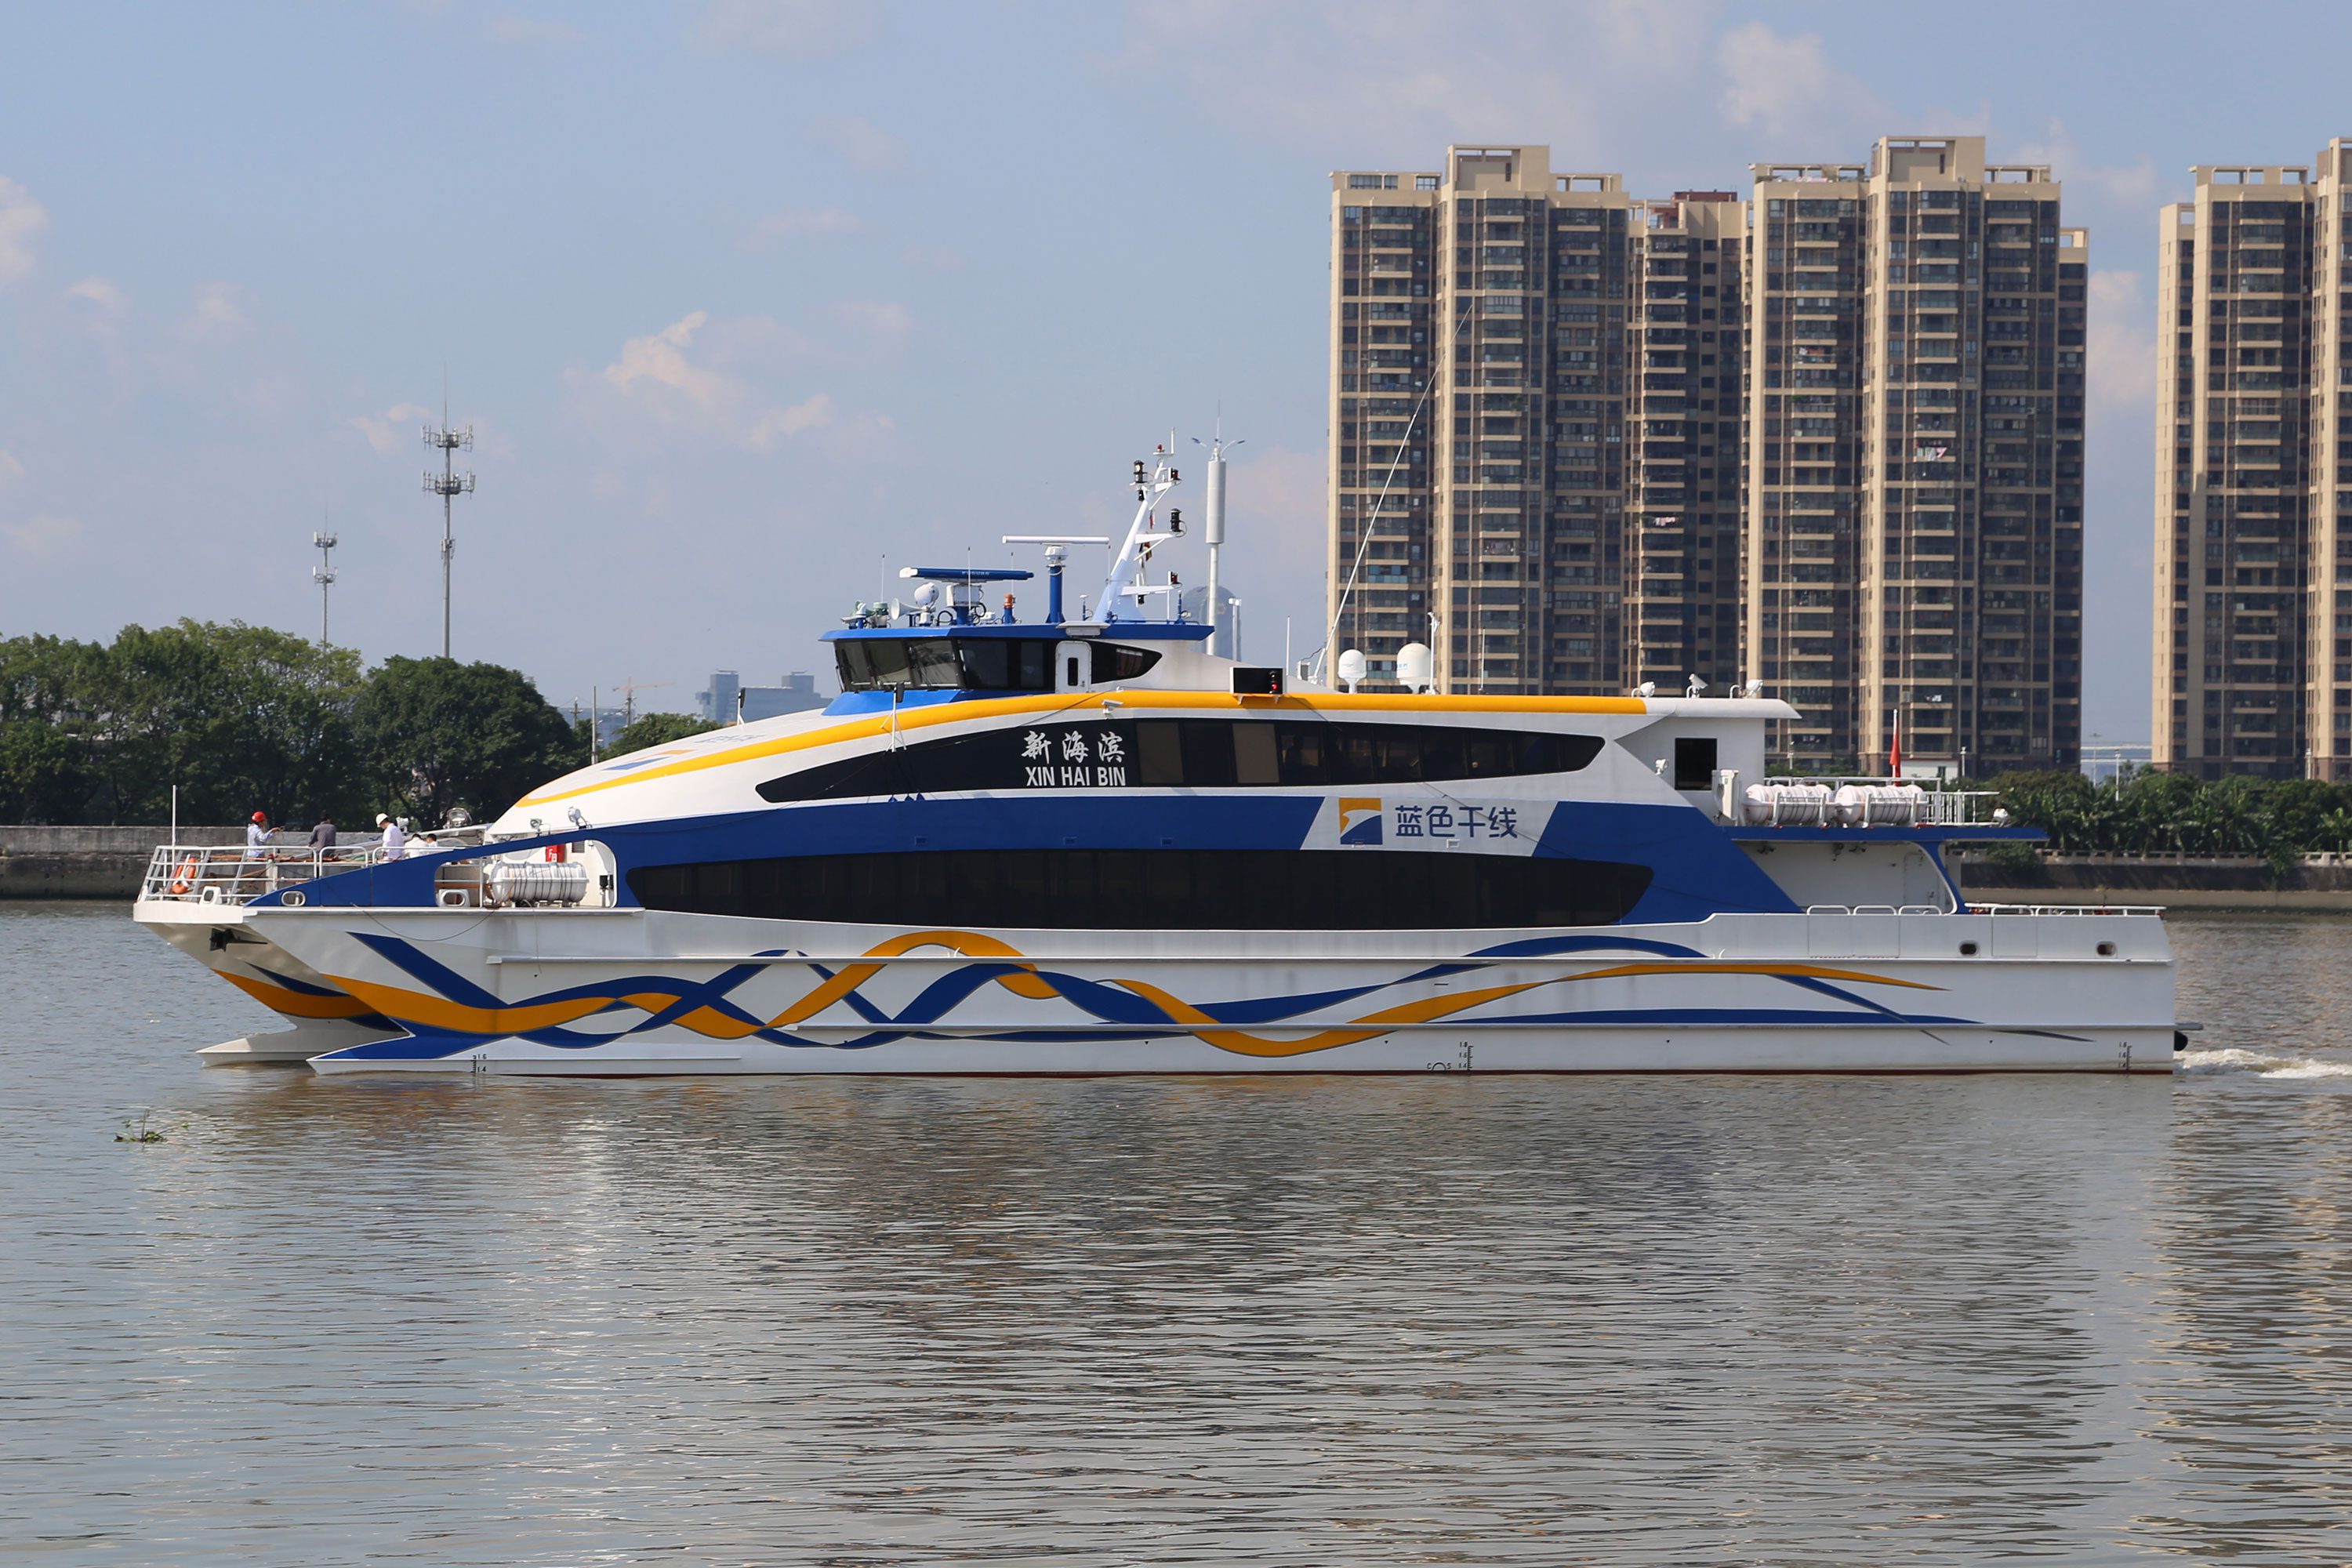 Incat Crowther’s Fiftieth Vessel for Operation in China